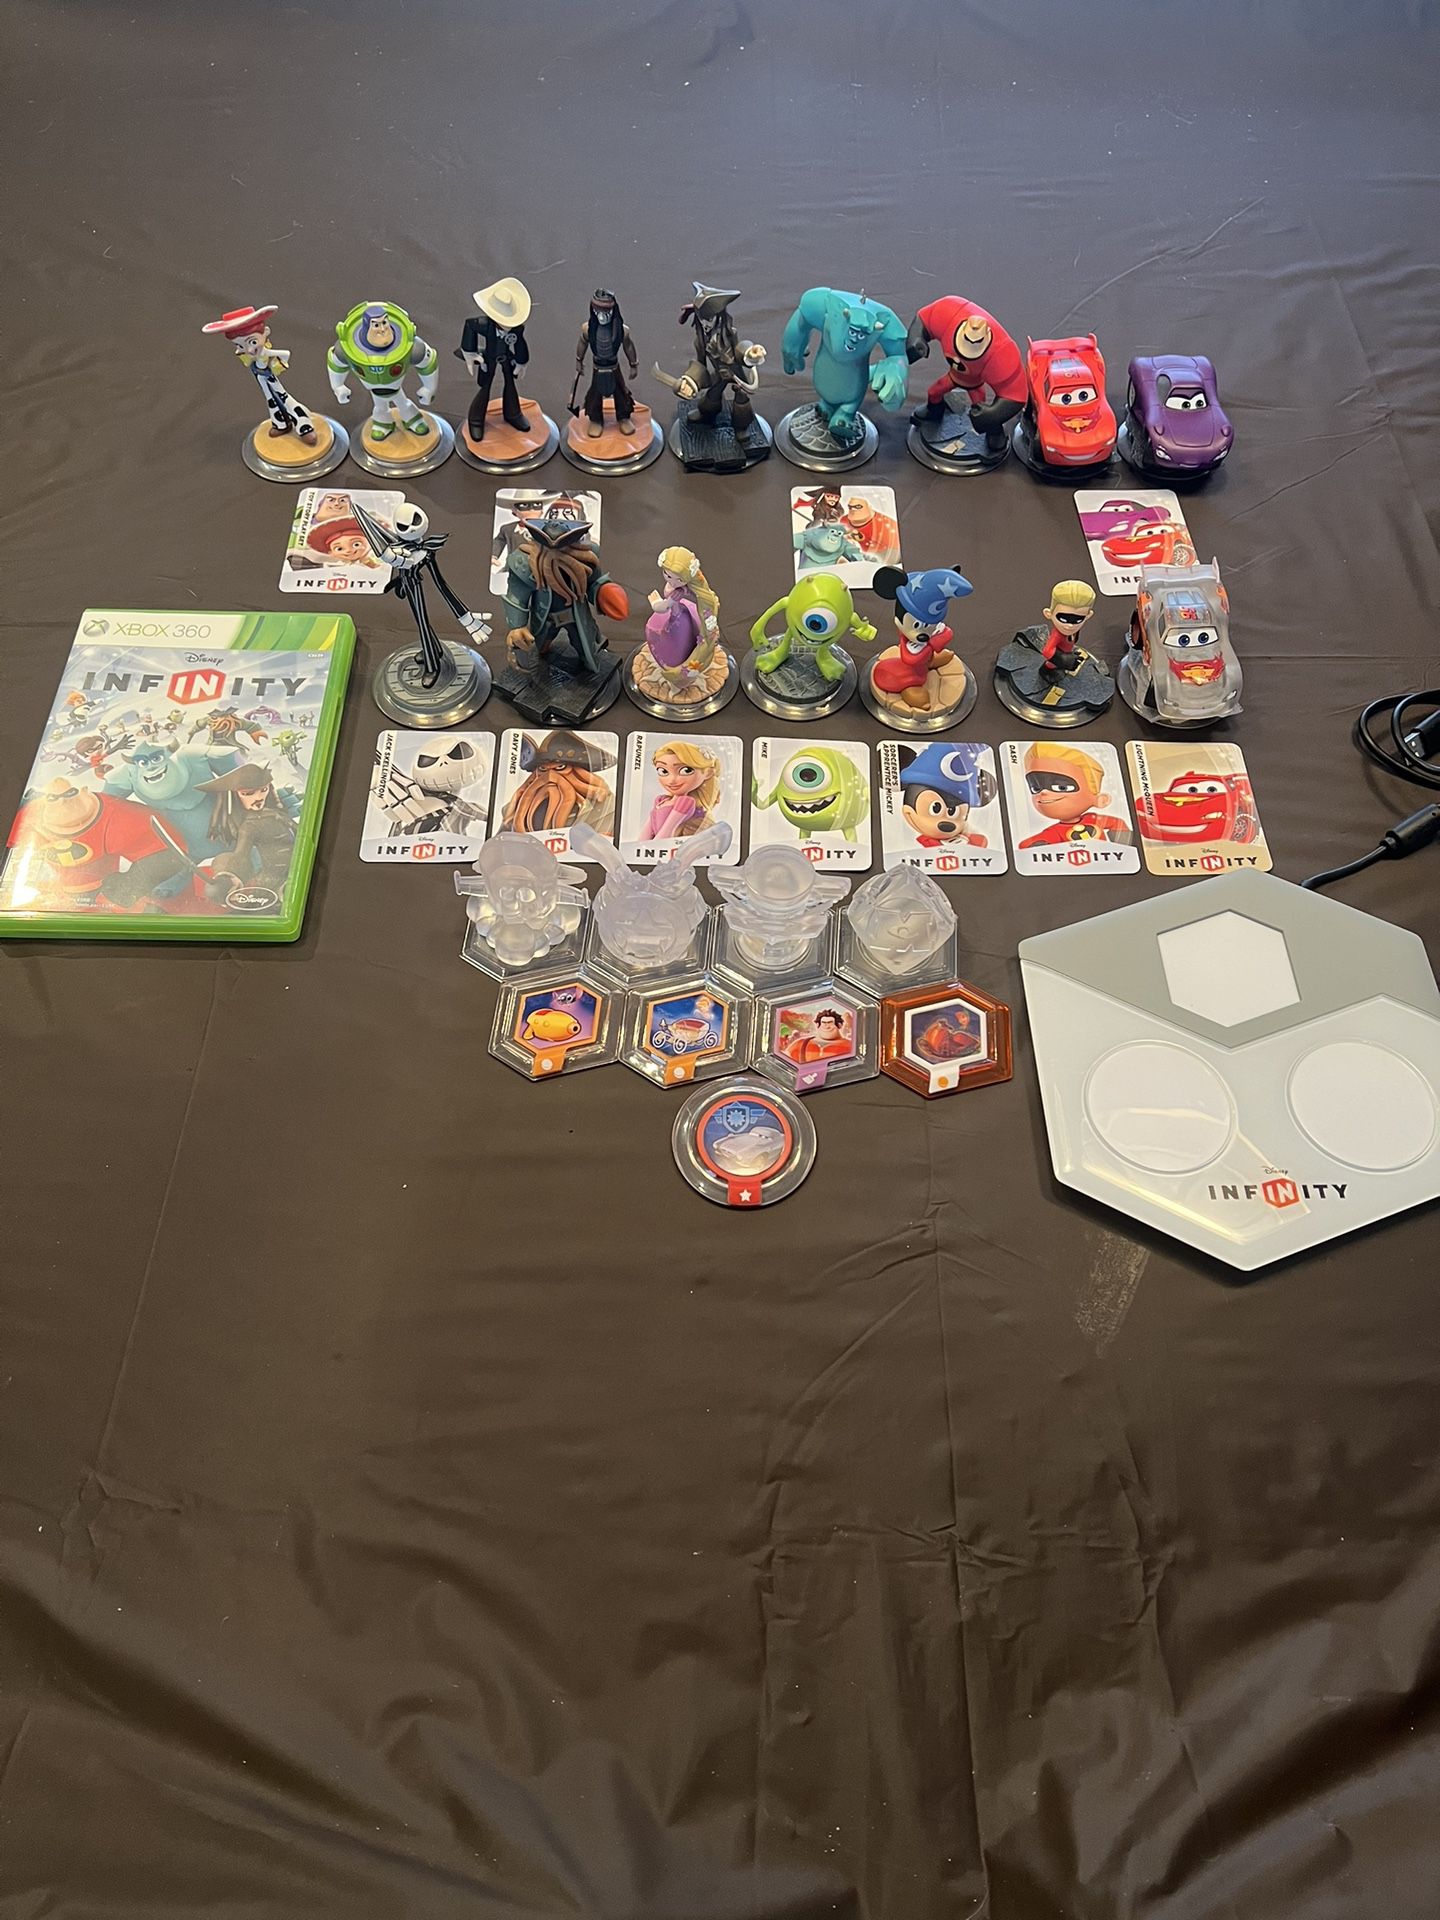 Lot Of Disney Infinity Characters & Game With Pad - XBOX 360